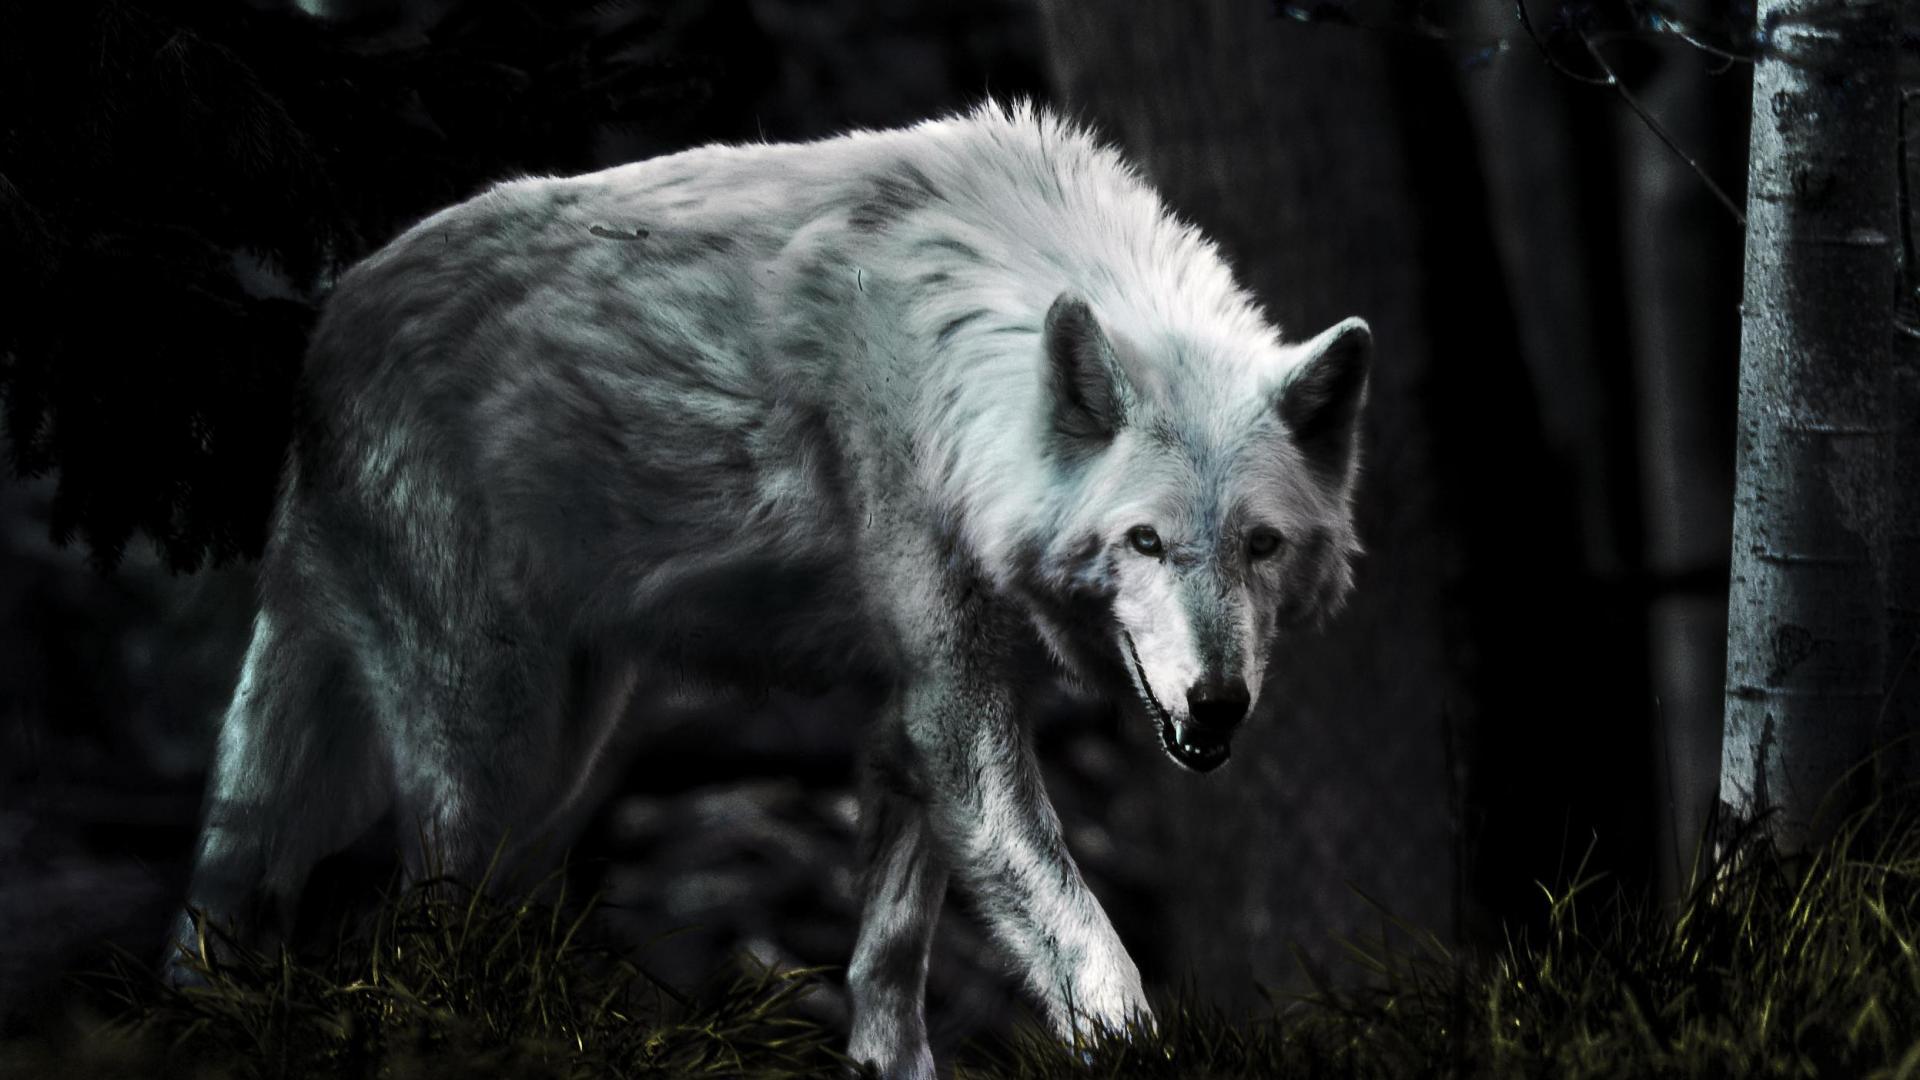 Wolf HD Wallpaper FREE Android Apps on Google Play. HD Wallpaper